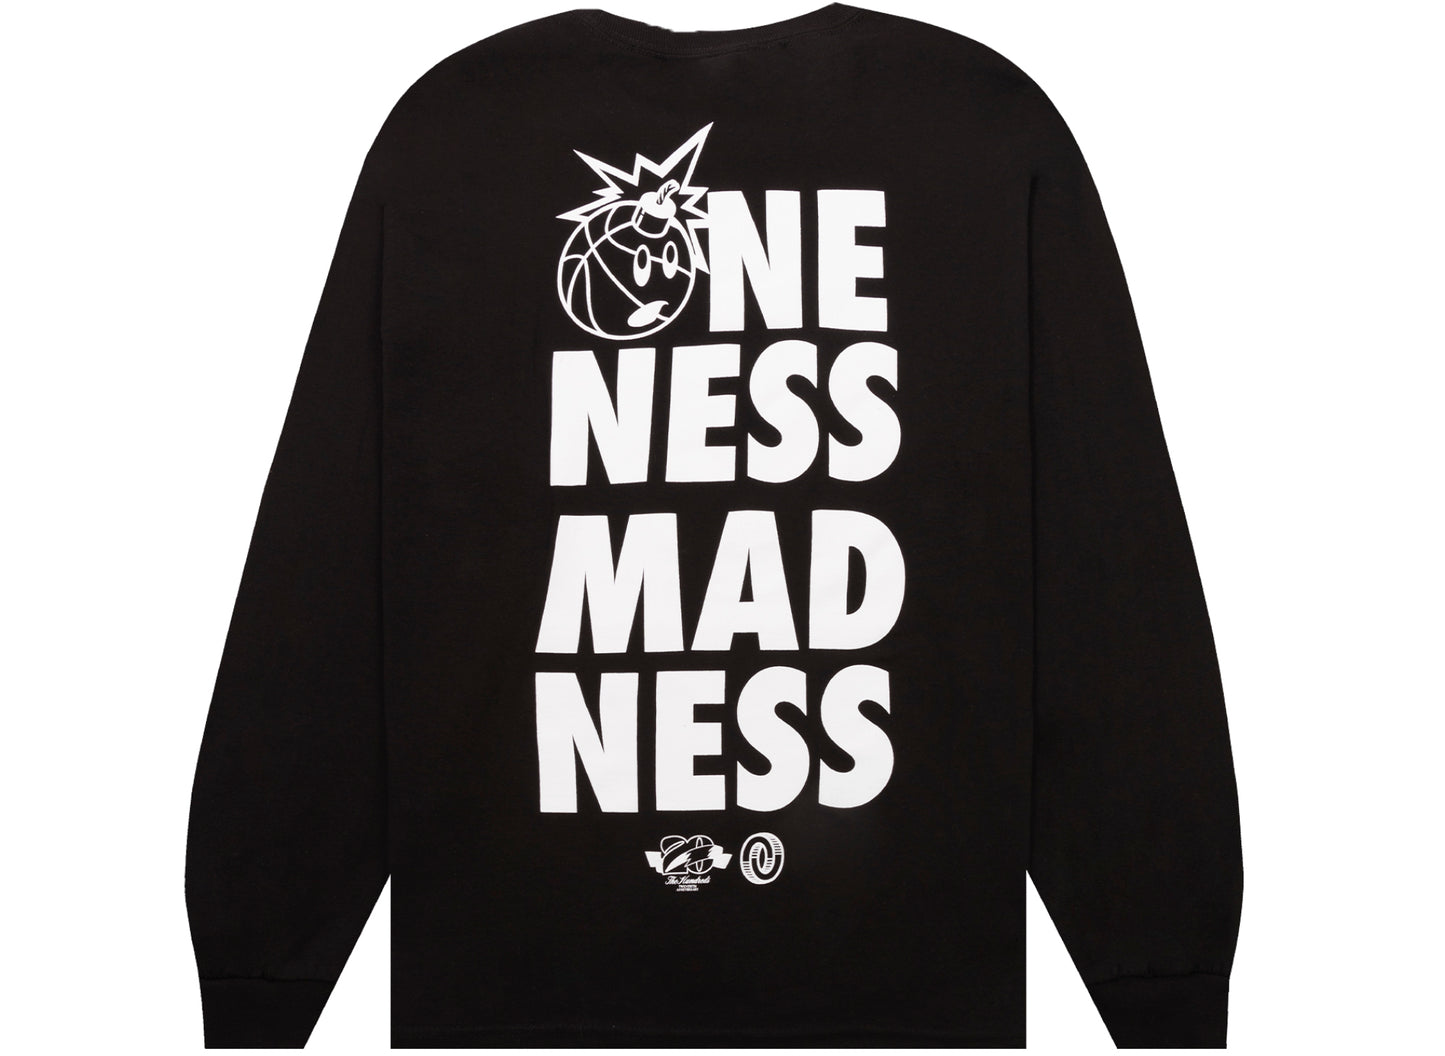 The Hundreds Oneness Madness L/S Tee in Black xld